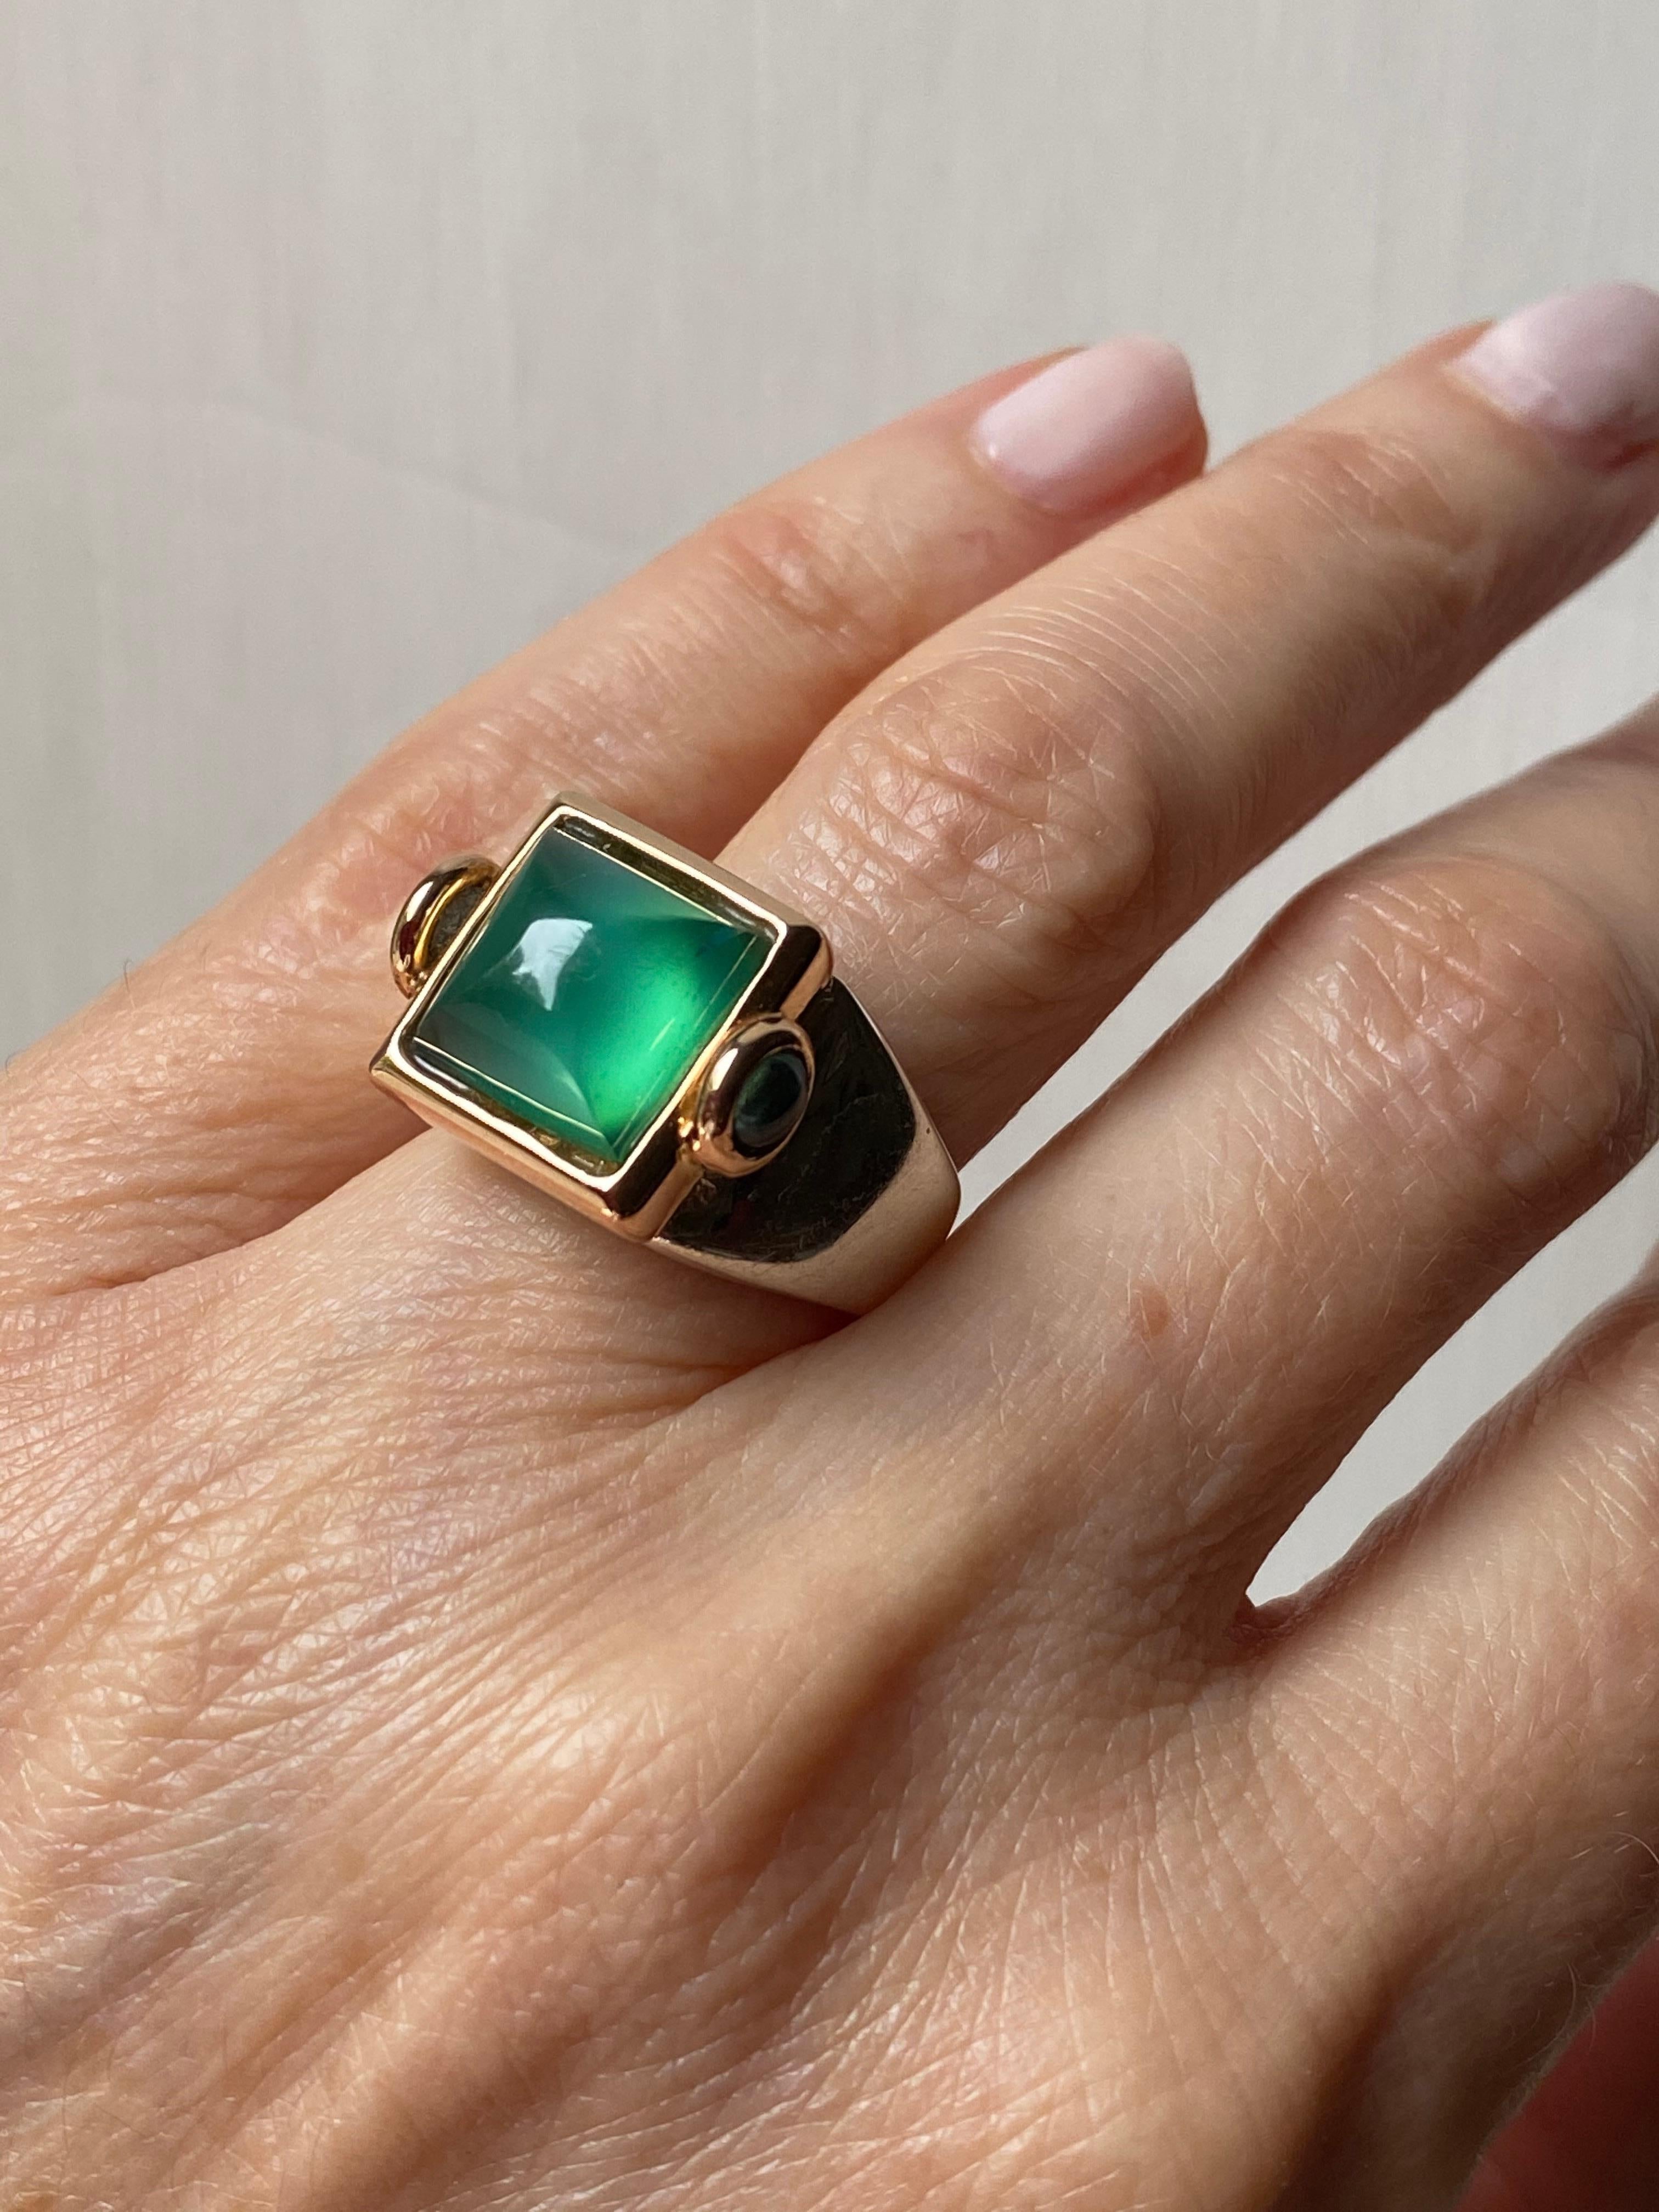 Art Deco Style 18 Karat Yellow And White Gold Green Agate Pyramid and Two Green Cabochon Tourmaline Cocktail Design Ring .
Any sizes available in two weeks by message 
This rings comes from the collection Castles of Italy designed by  Rossella